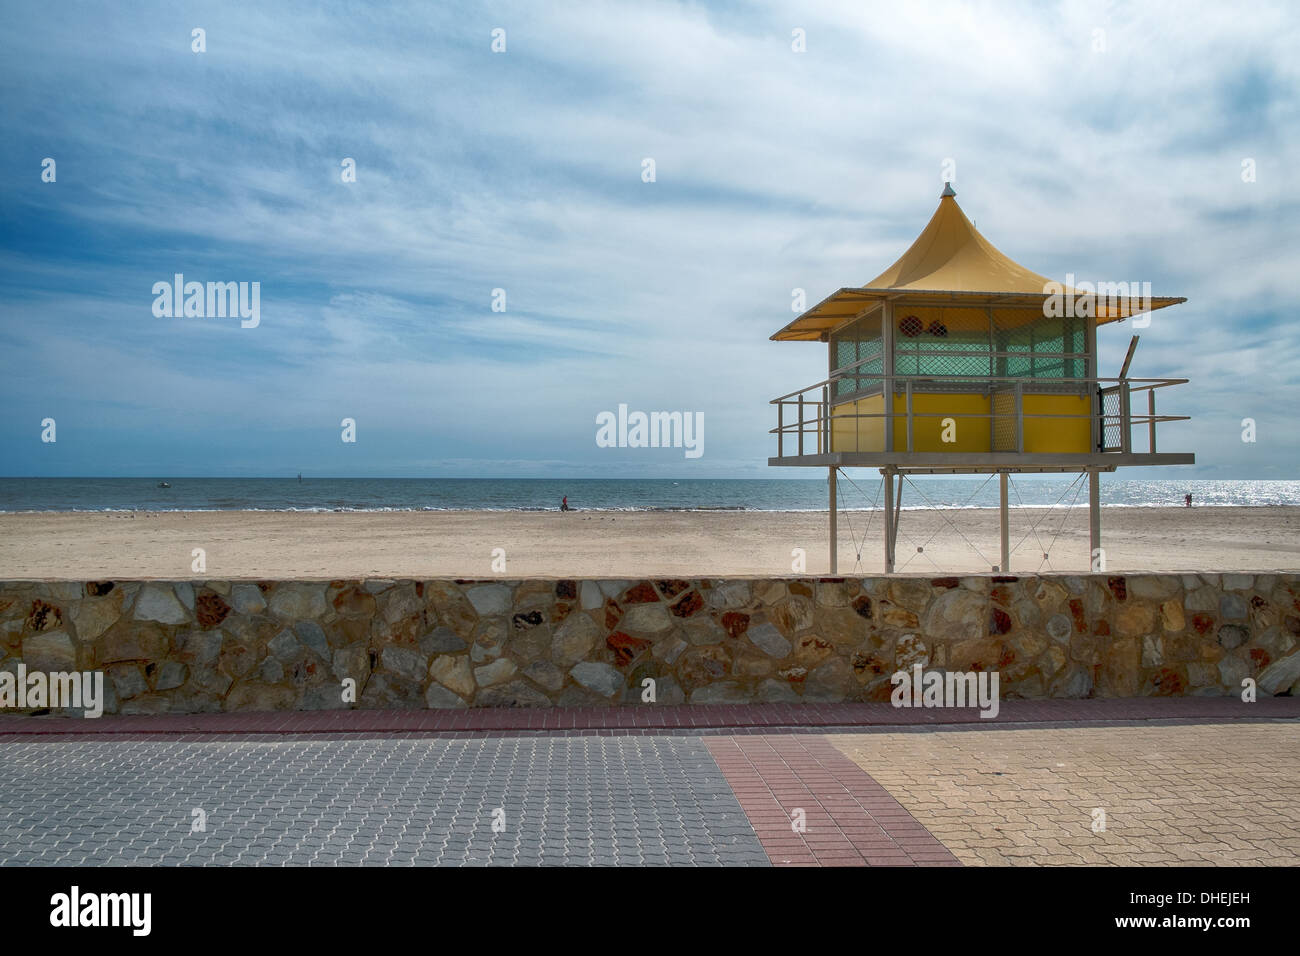 Lifeguards watch out from a surf life saving tower on an Australian beach in Glenelg, Adelaide. Stock Photo